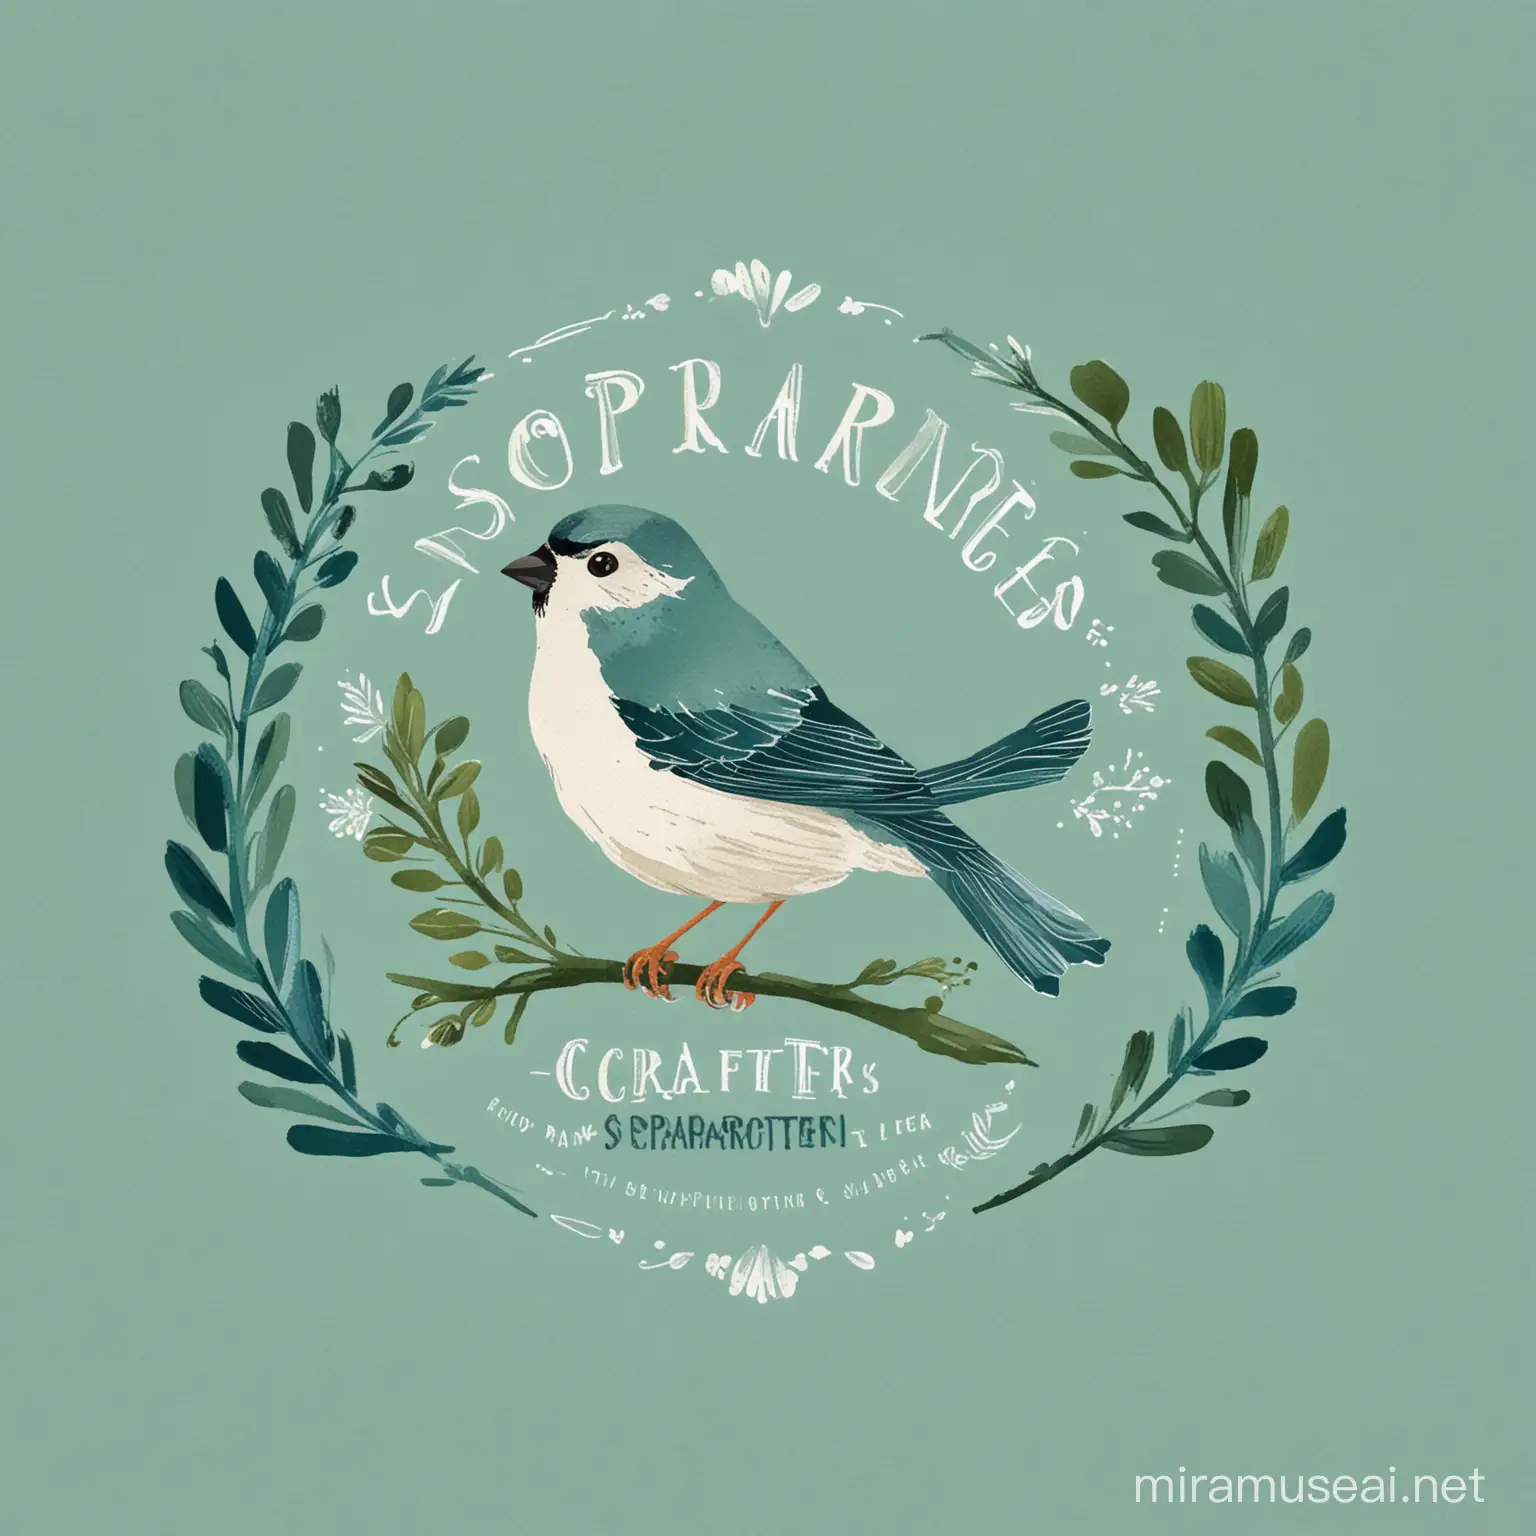 Certainly, here's the updated prompt:

"Please generate a logo design image for SparrowCrafters, a digital marketing company. Include a sparrow and a crafting element, representing simplicity and versatility. Use a vibrant and inviting color scheme, incorporating shades of blue and green. Utilize bold and attention-grabbing fonts for the heading. Save the image in a high-resolution format."